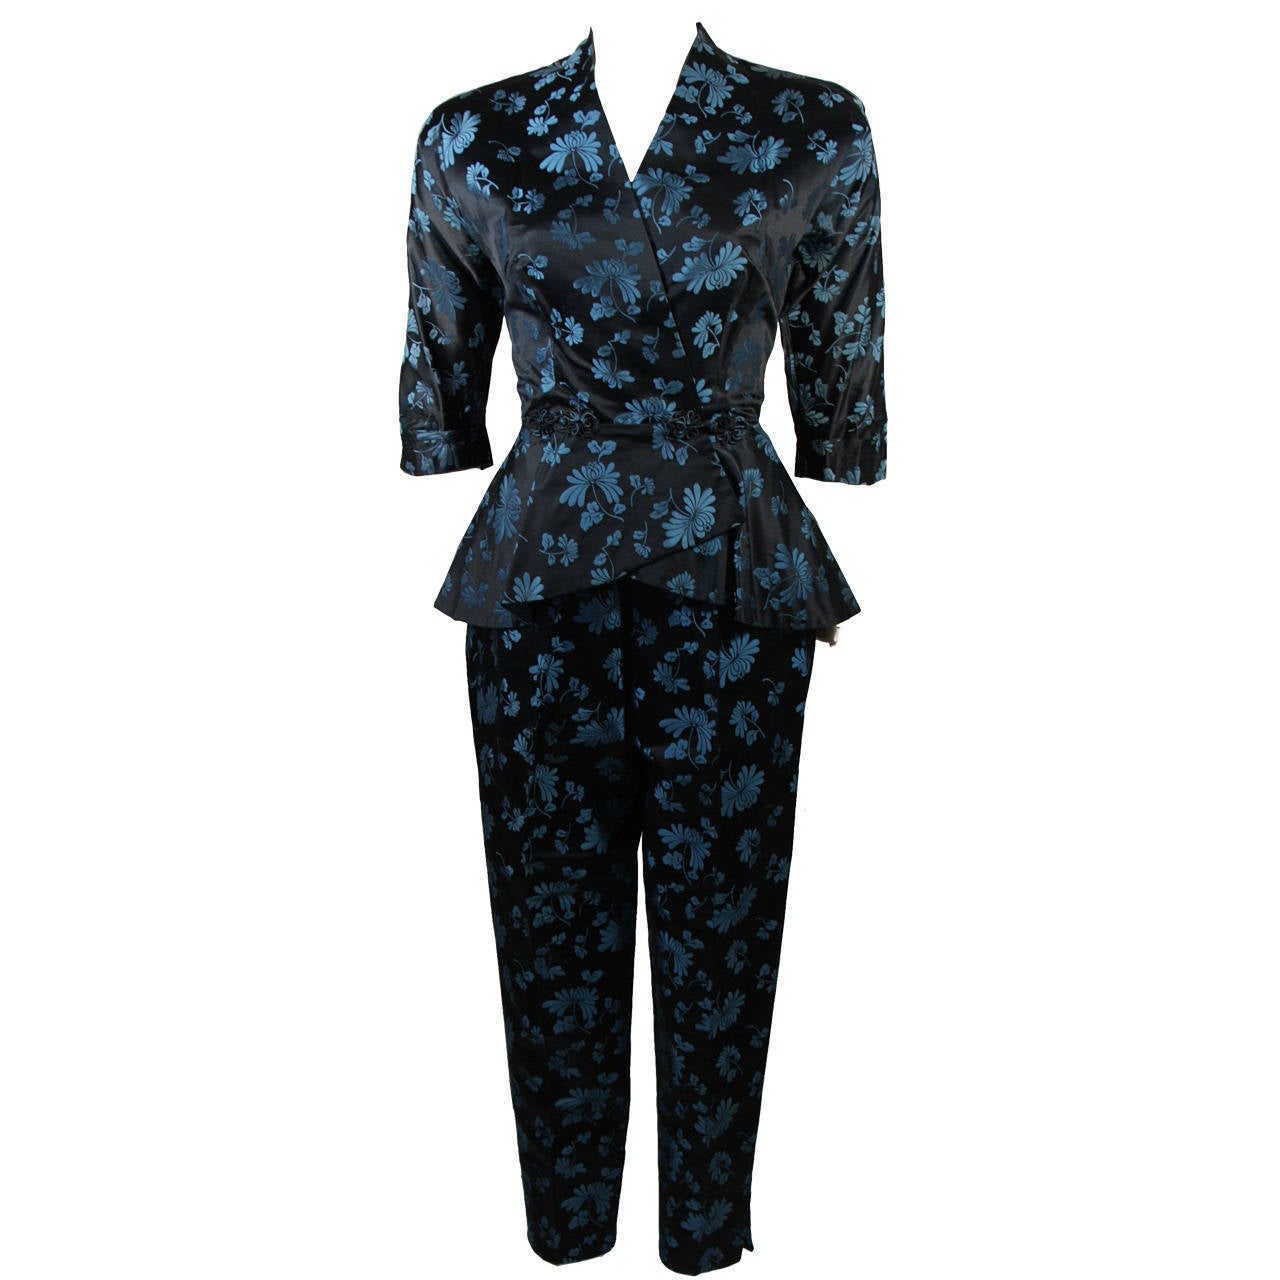 Atomic Era Dynasty Asian Inspired Black and Blue Floral Pant Suit Sz 0-2